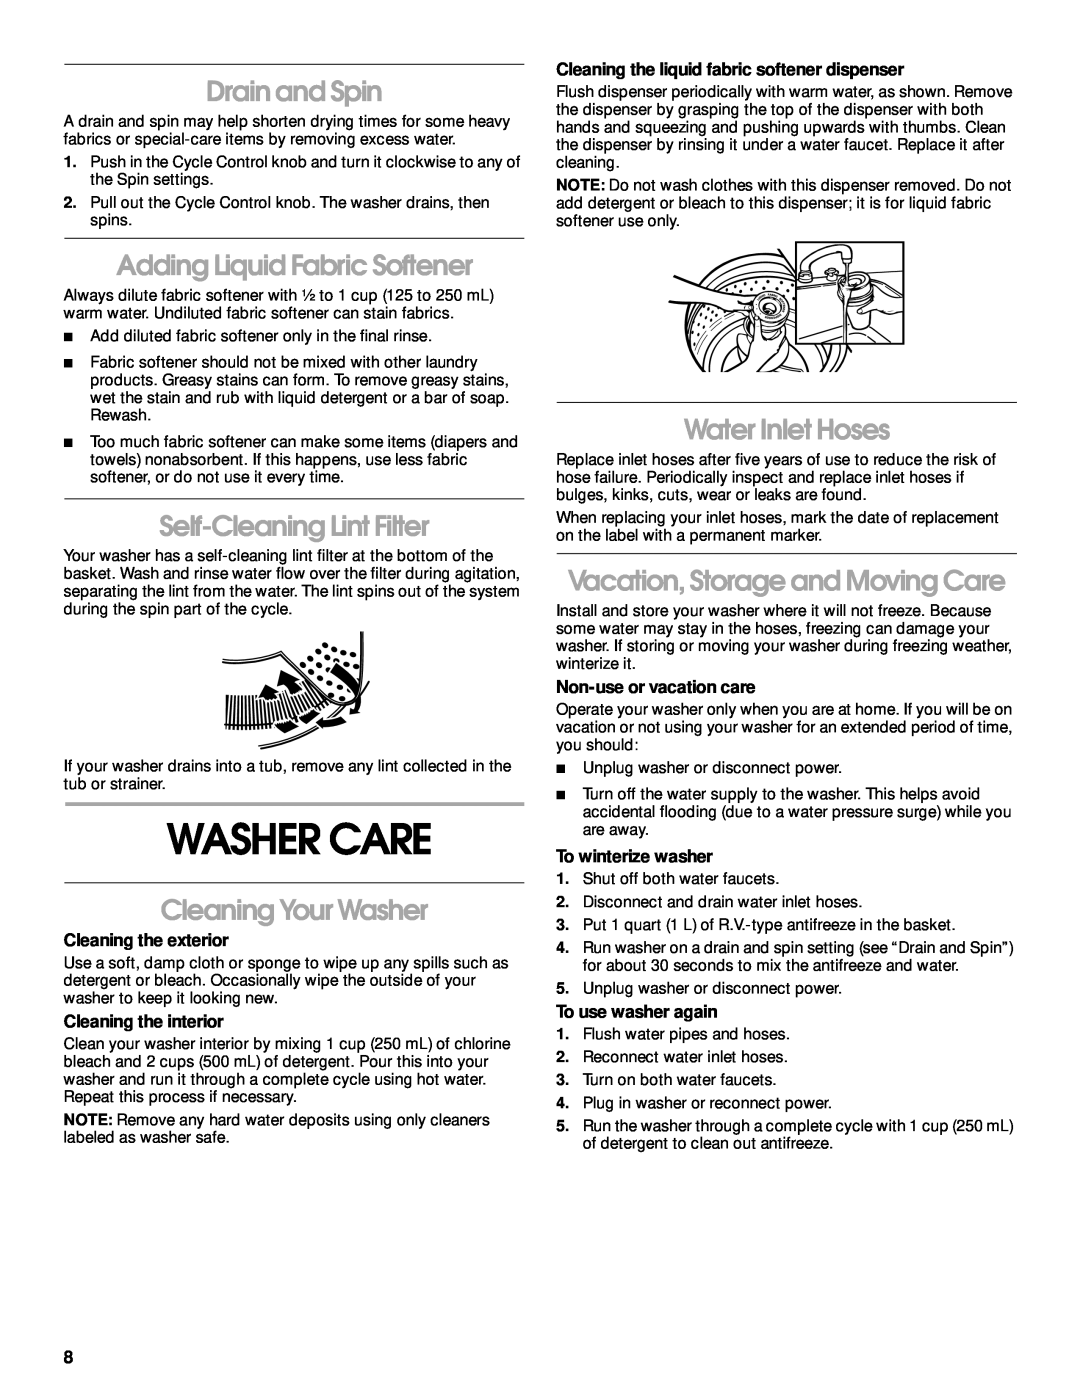 Whirlpool 3953962 Washer Care, Drain and Spin, Adding Liquid Fabric Softener, Self-Cleaning Lint Filter, Water Inlet Hoses 